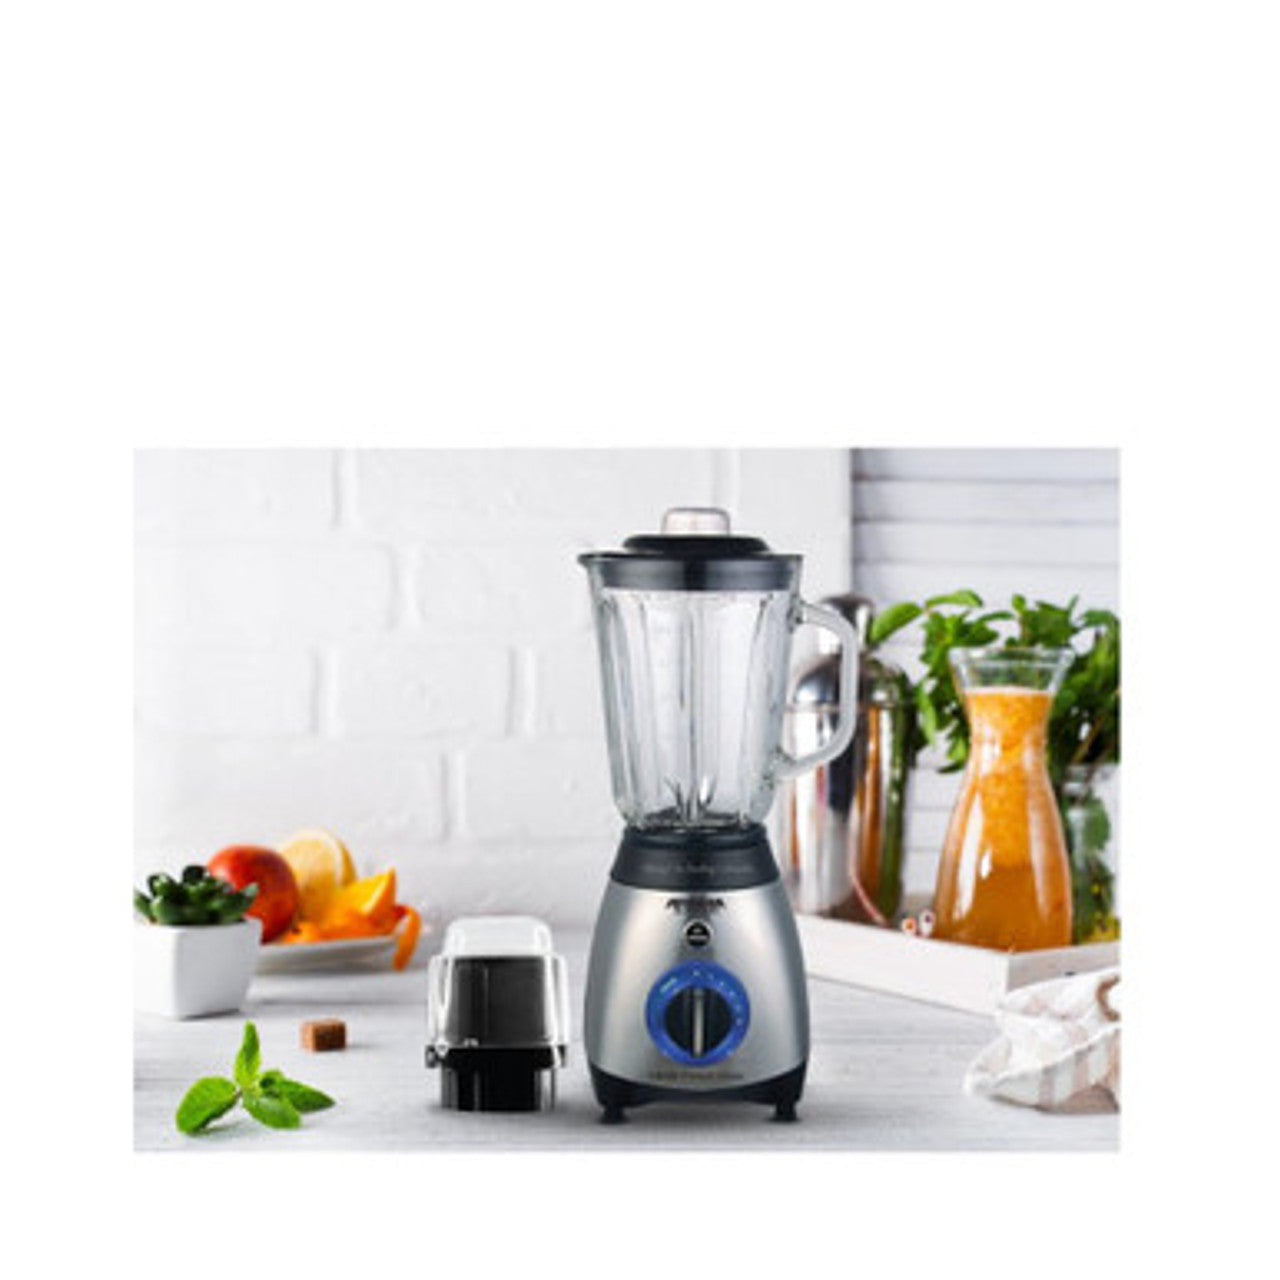 Arshia 2 in 1 Blender with coffee grinder Silver